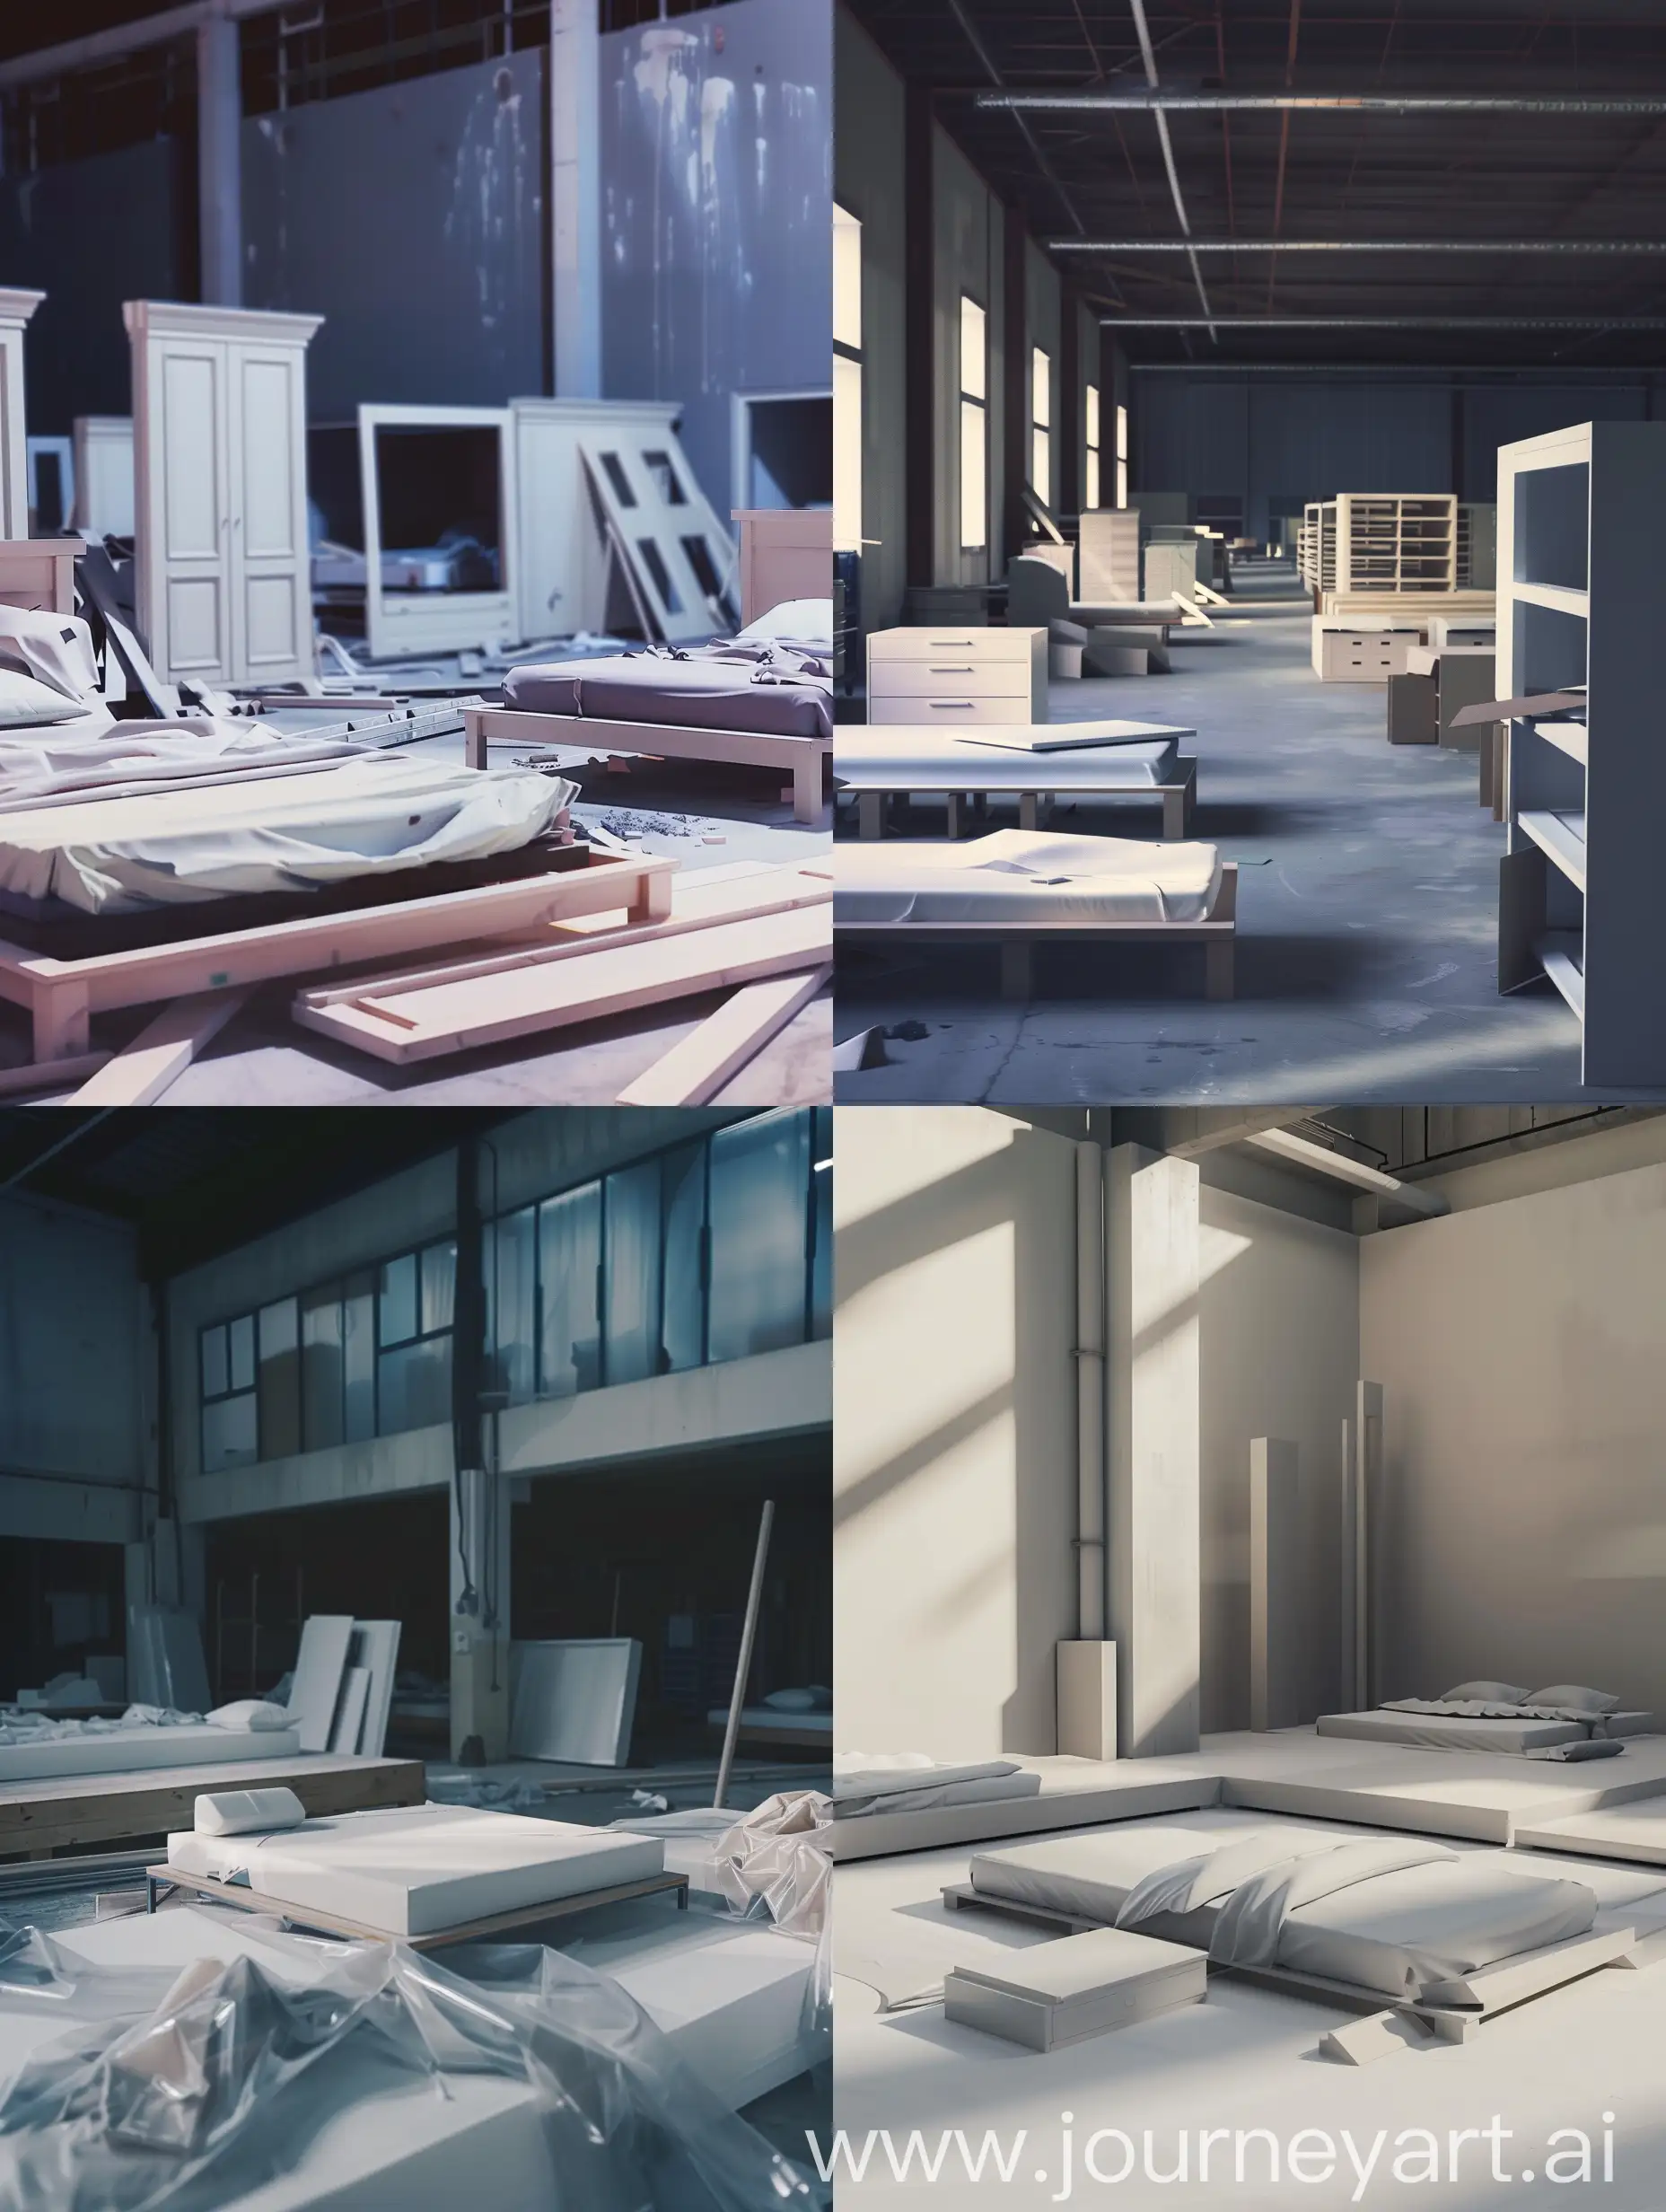 Realistic-Disassembled-Bedroom-in-Manufacturing-Factory